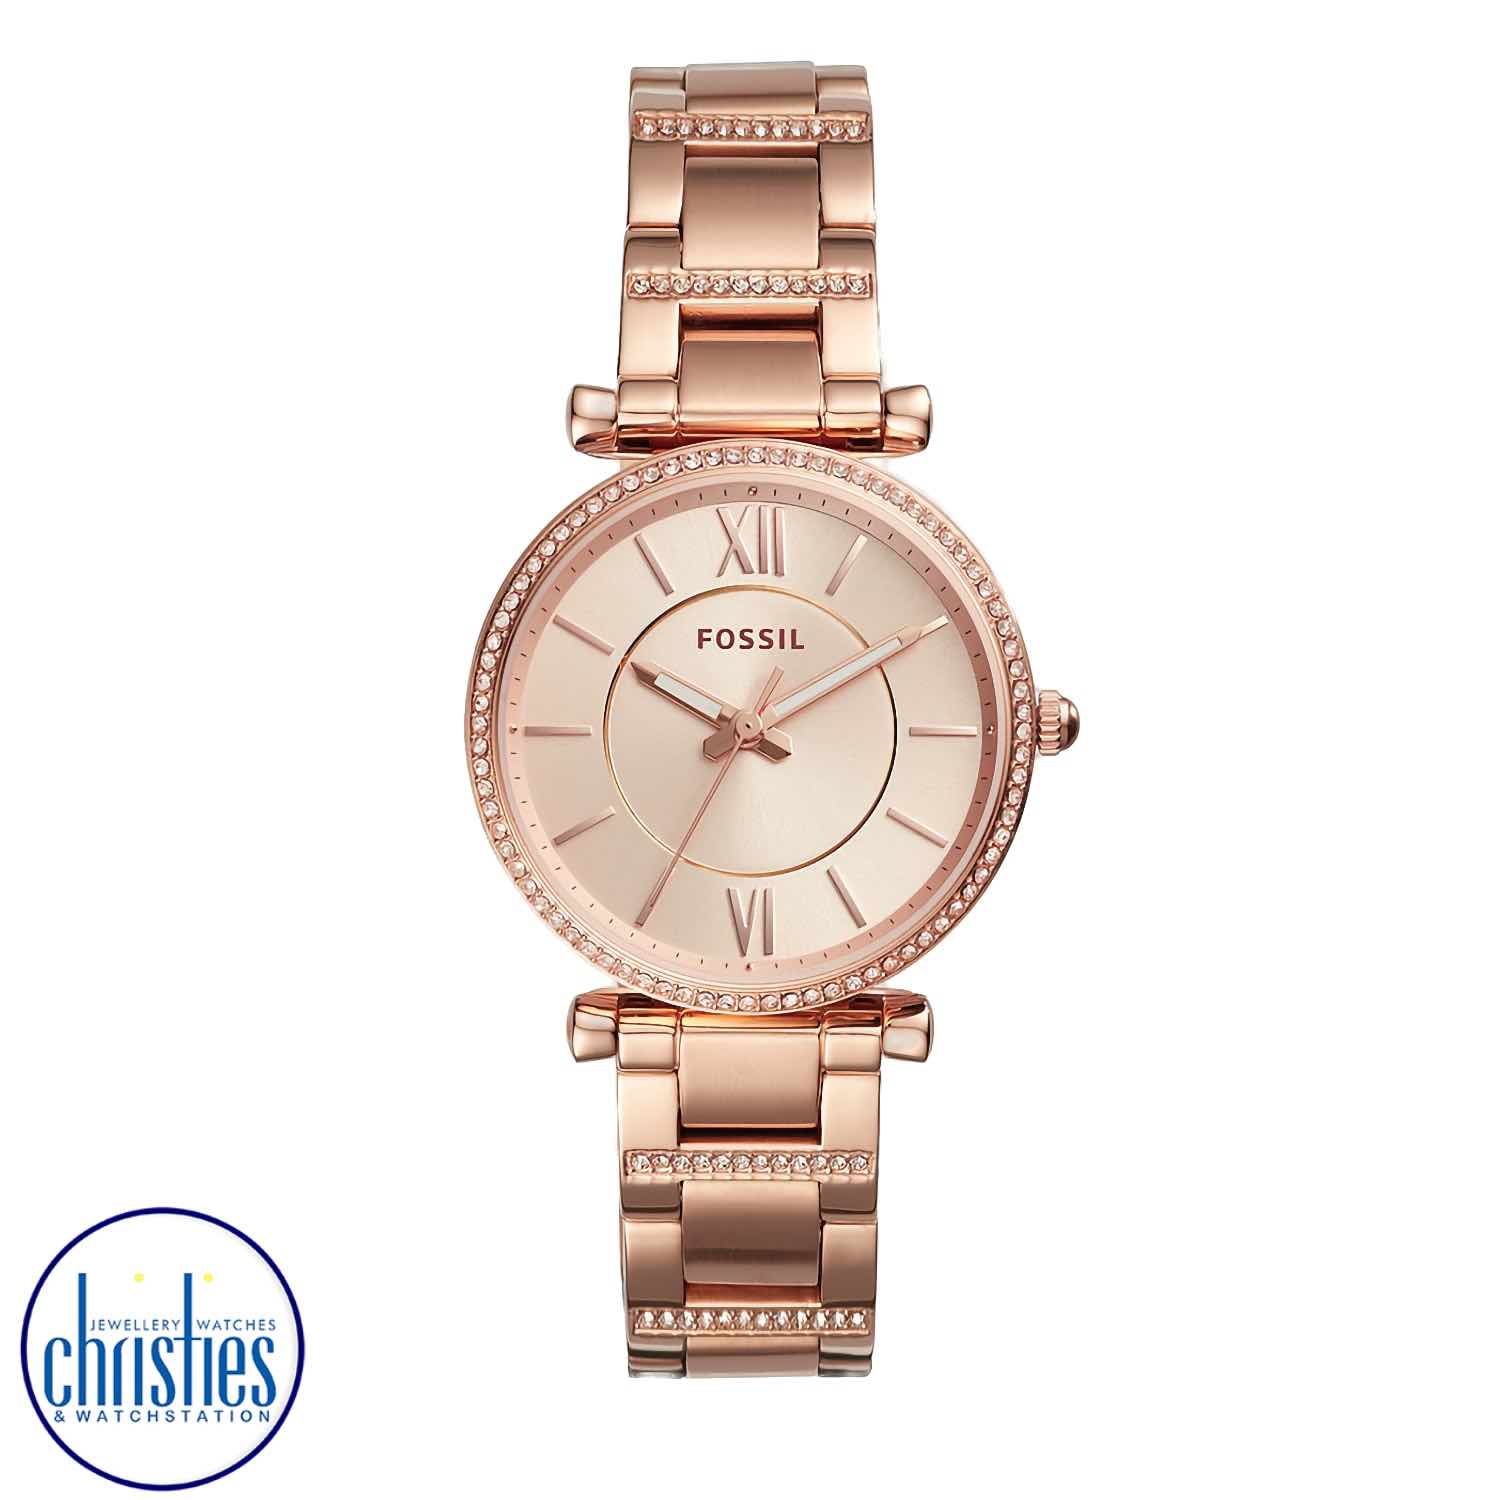 ES4301 Fossil Carlie Three-Hand Rose-Gold-Tone Stainless Steel Watch. ES4301 Fossil Carlie Three-Hand Rose-Gold-Tone Stainless Steel WatchAfterpay - Split your purchase into 4 instalments - Pay for your purchase over 4 instalments, due every two weeks. fo